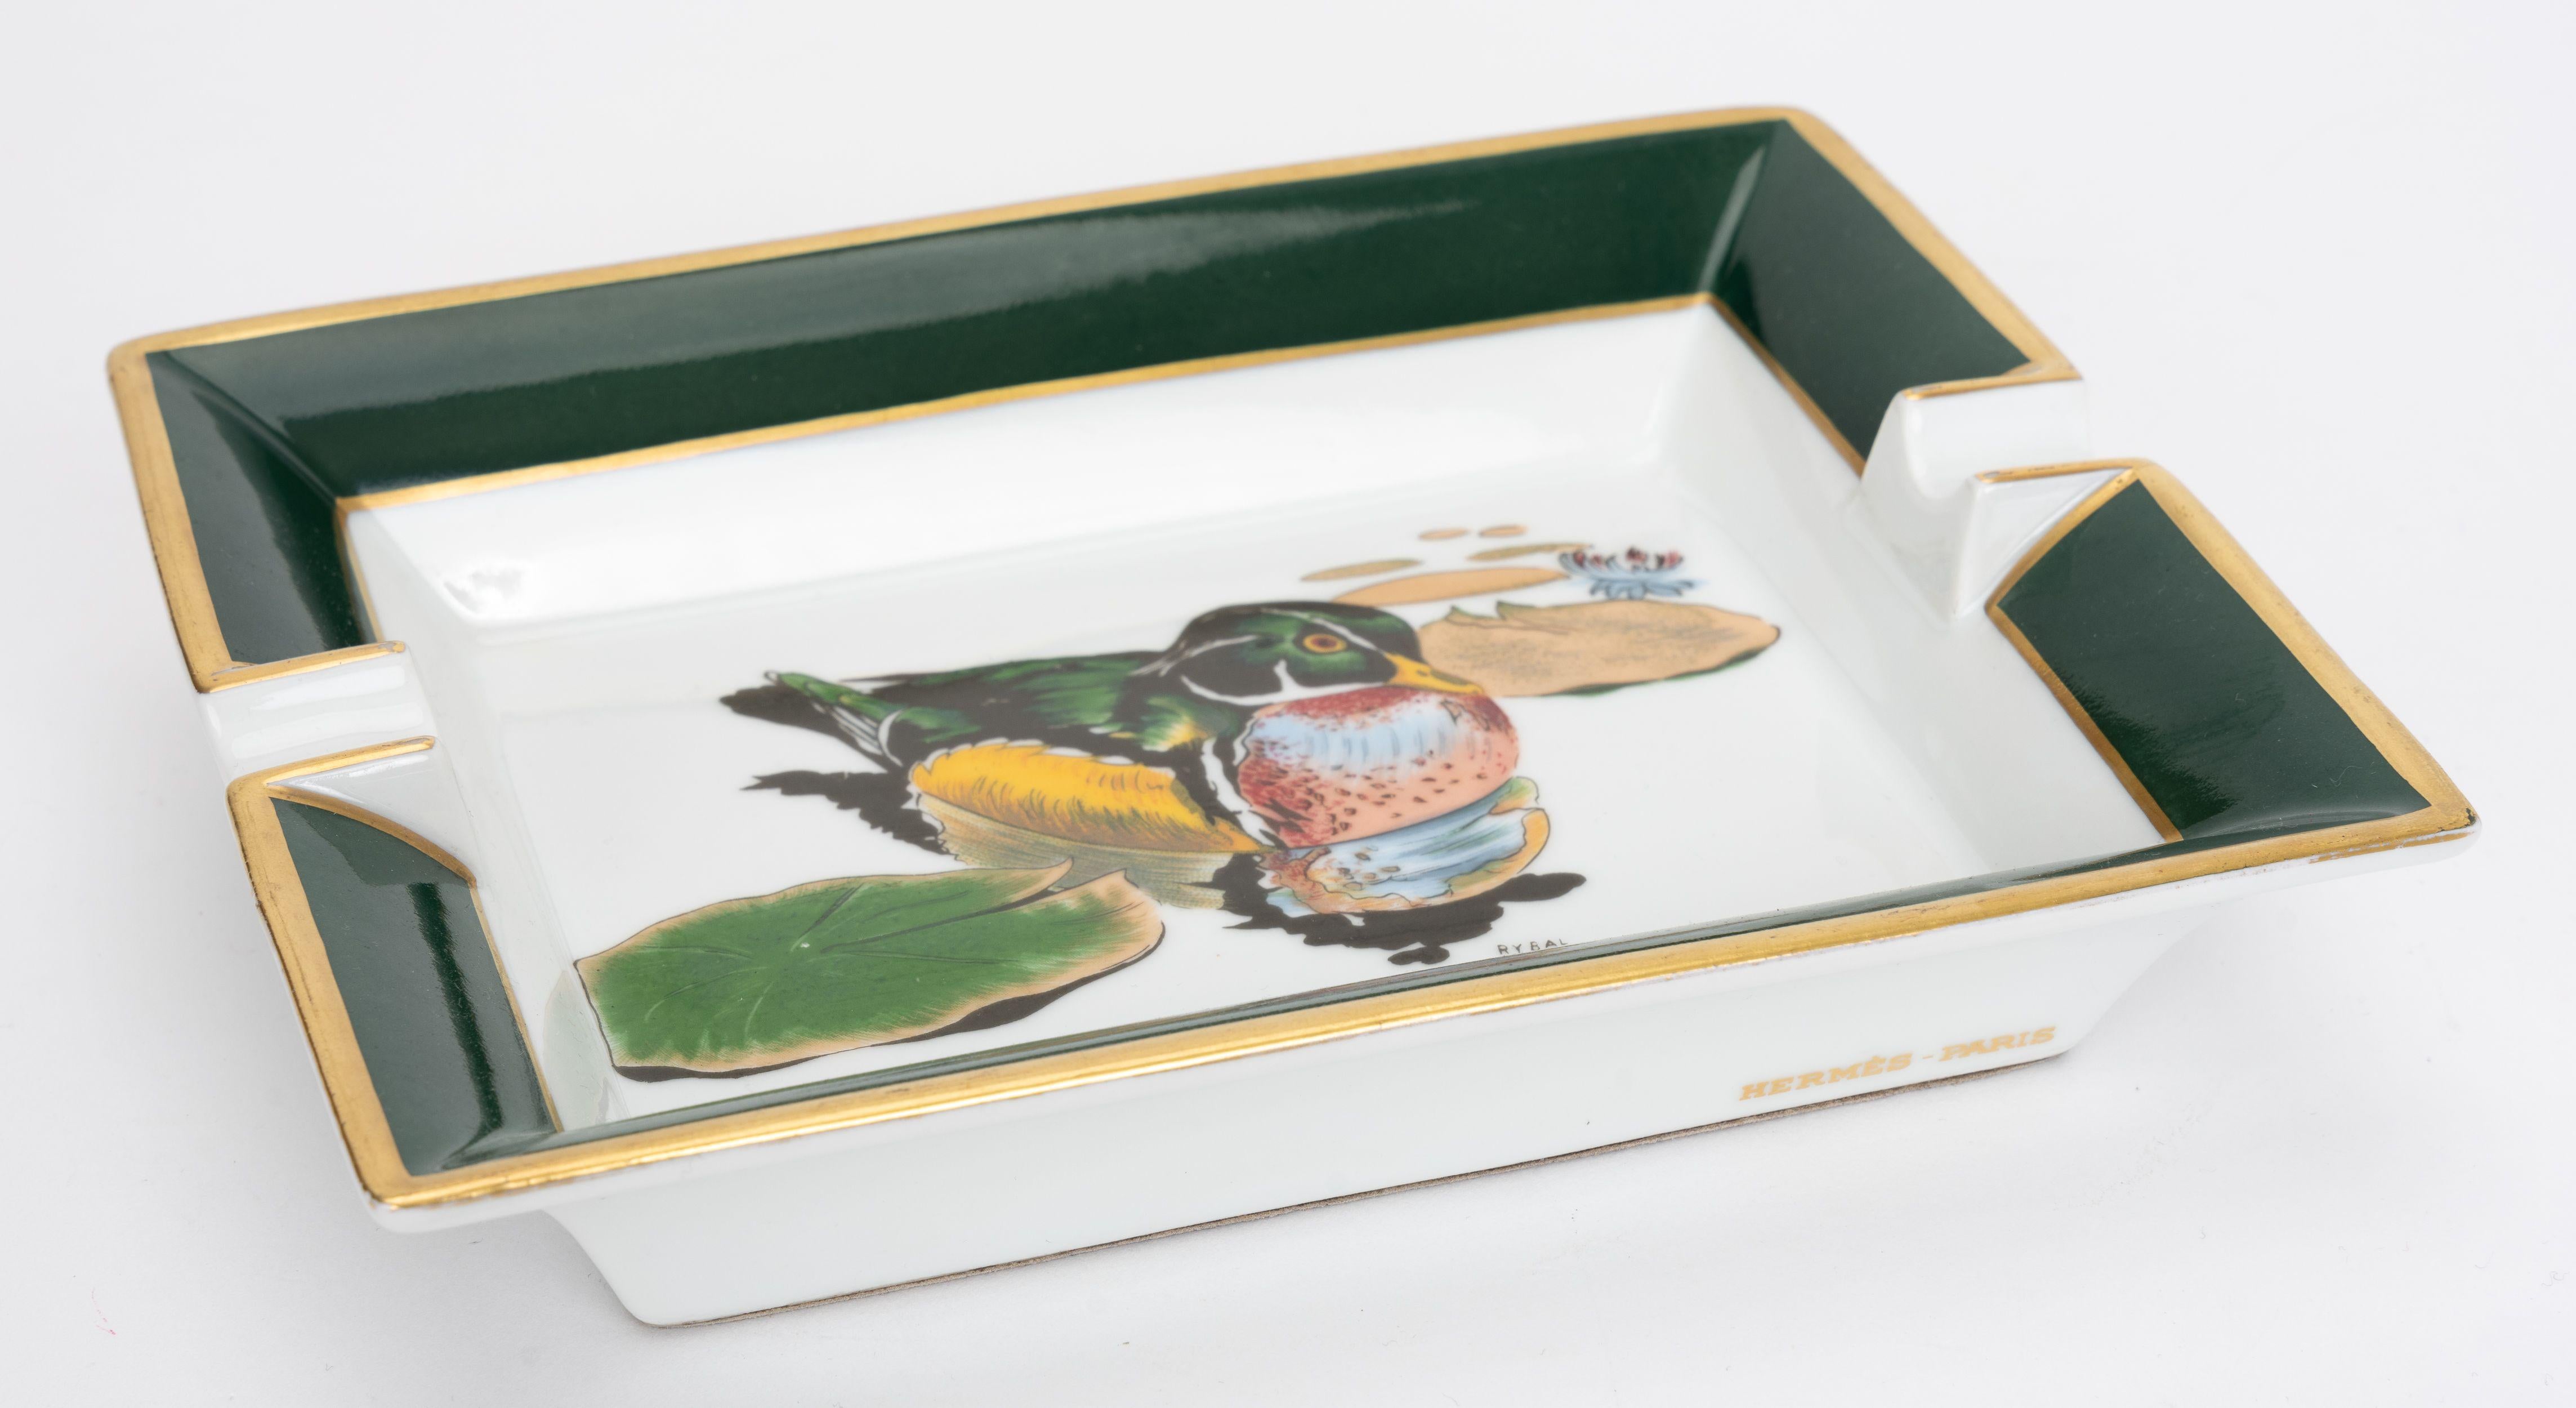 Hermès collectible green and white porcelain ashtray with duck design. Back protective suede with minor wear.